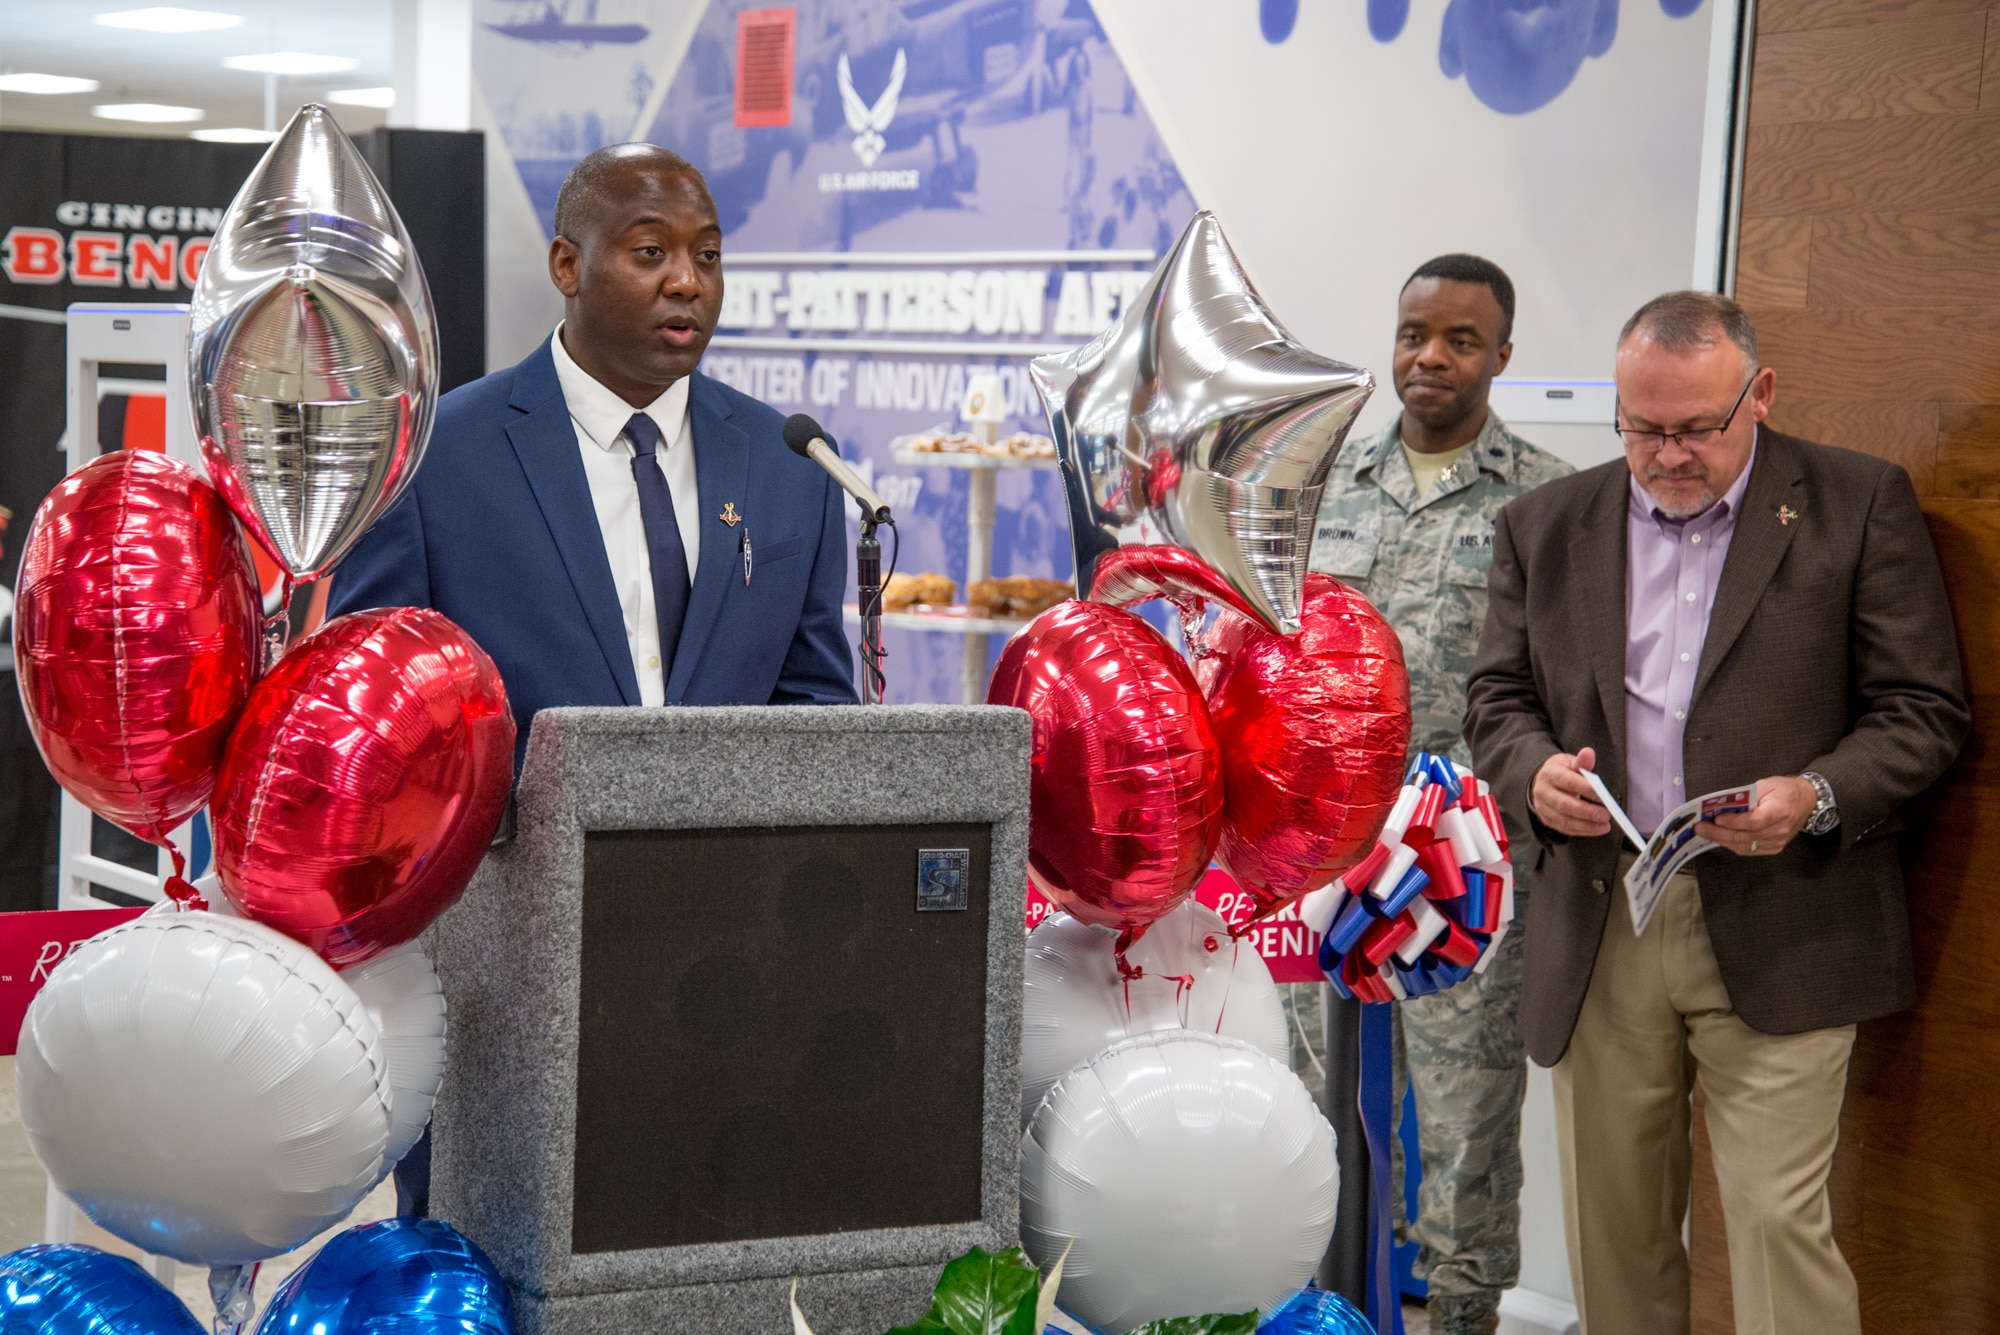 Jermaine Wilson, Wright-Patterson Exchange general manager, delivers remarks at the Exchange's grand re-opening ceremony Oct. 25, 2018 after completing a $6.4 million renovation to the nearly 40-year-old facility.